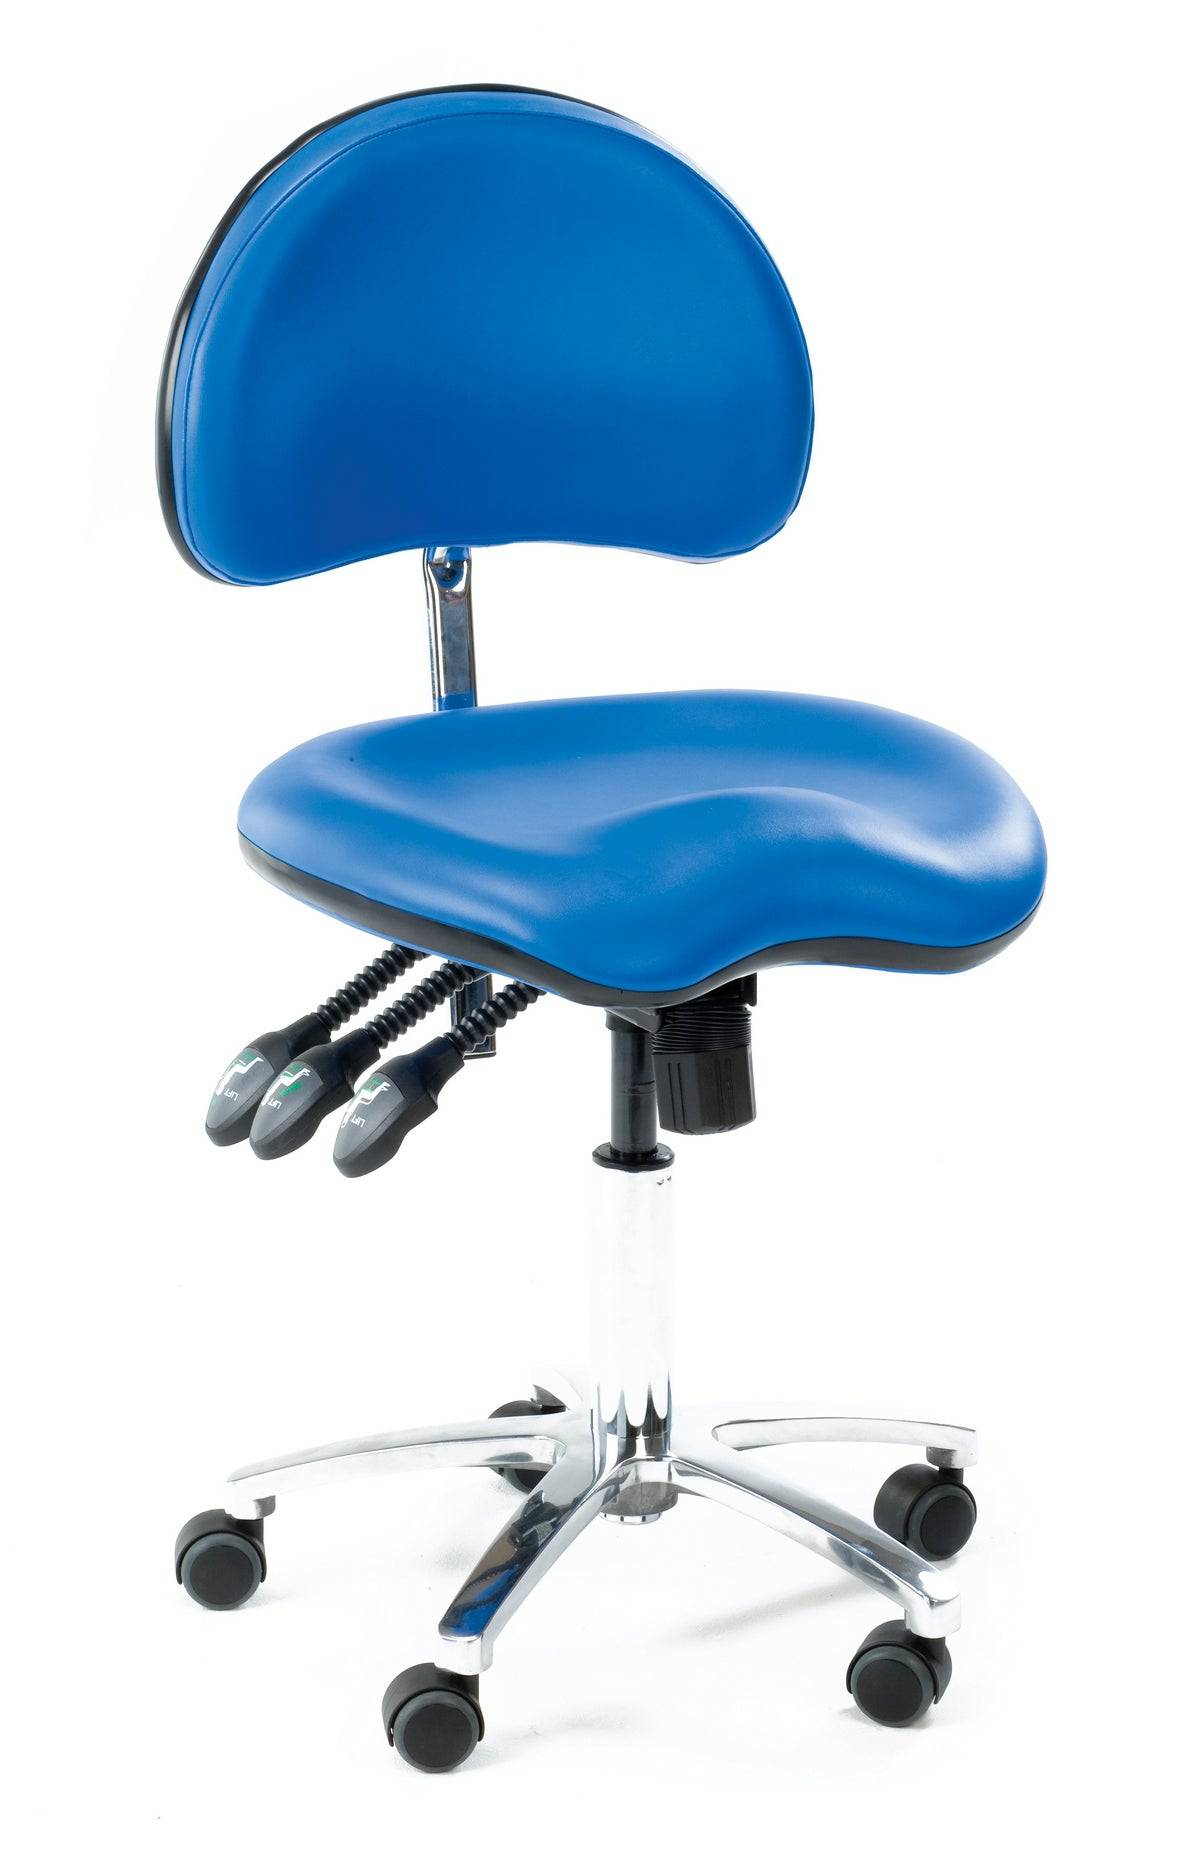 Seers Contoured Medical Chair